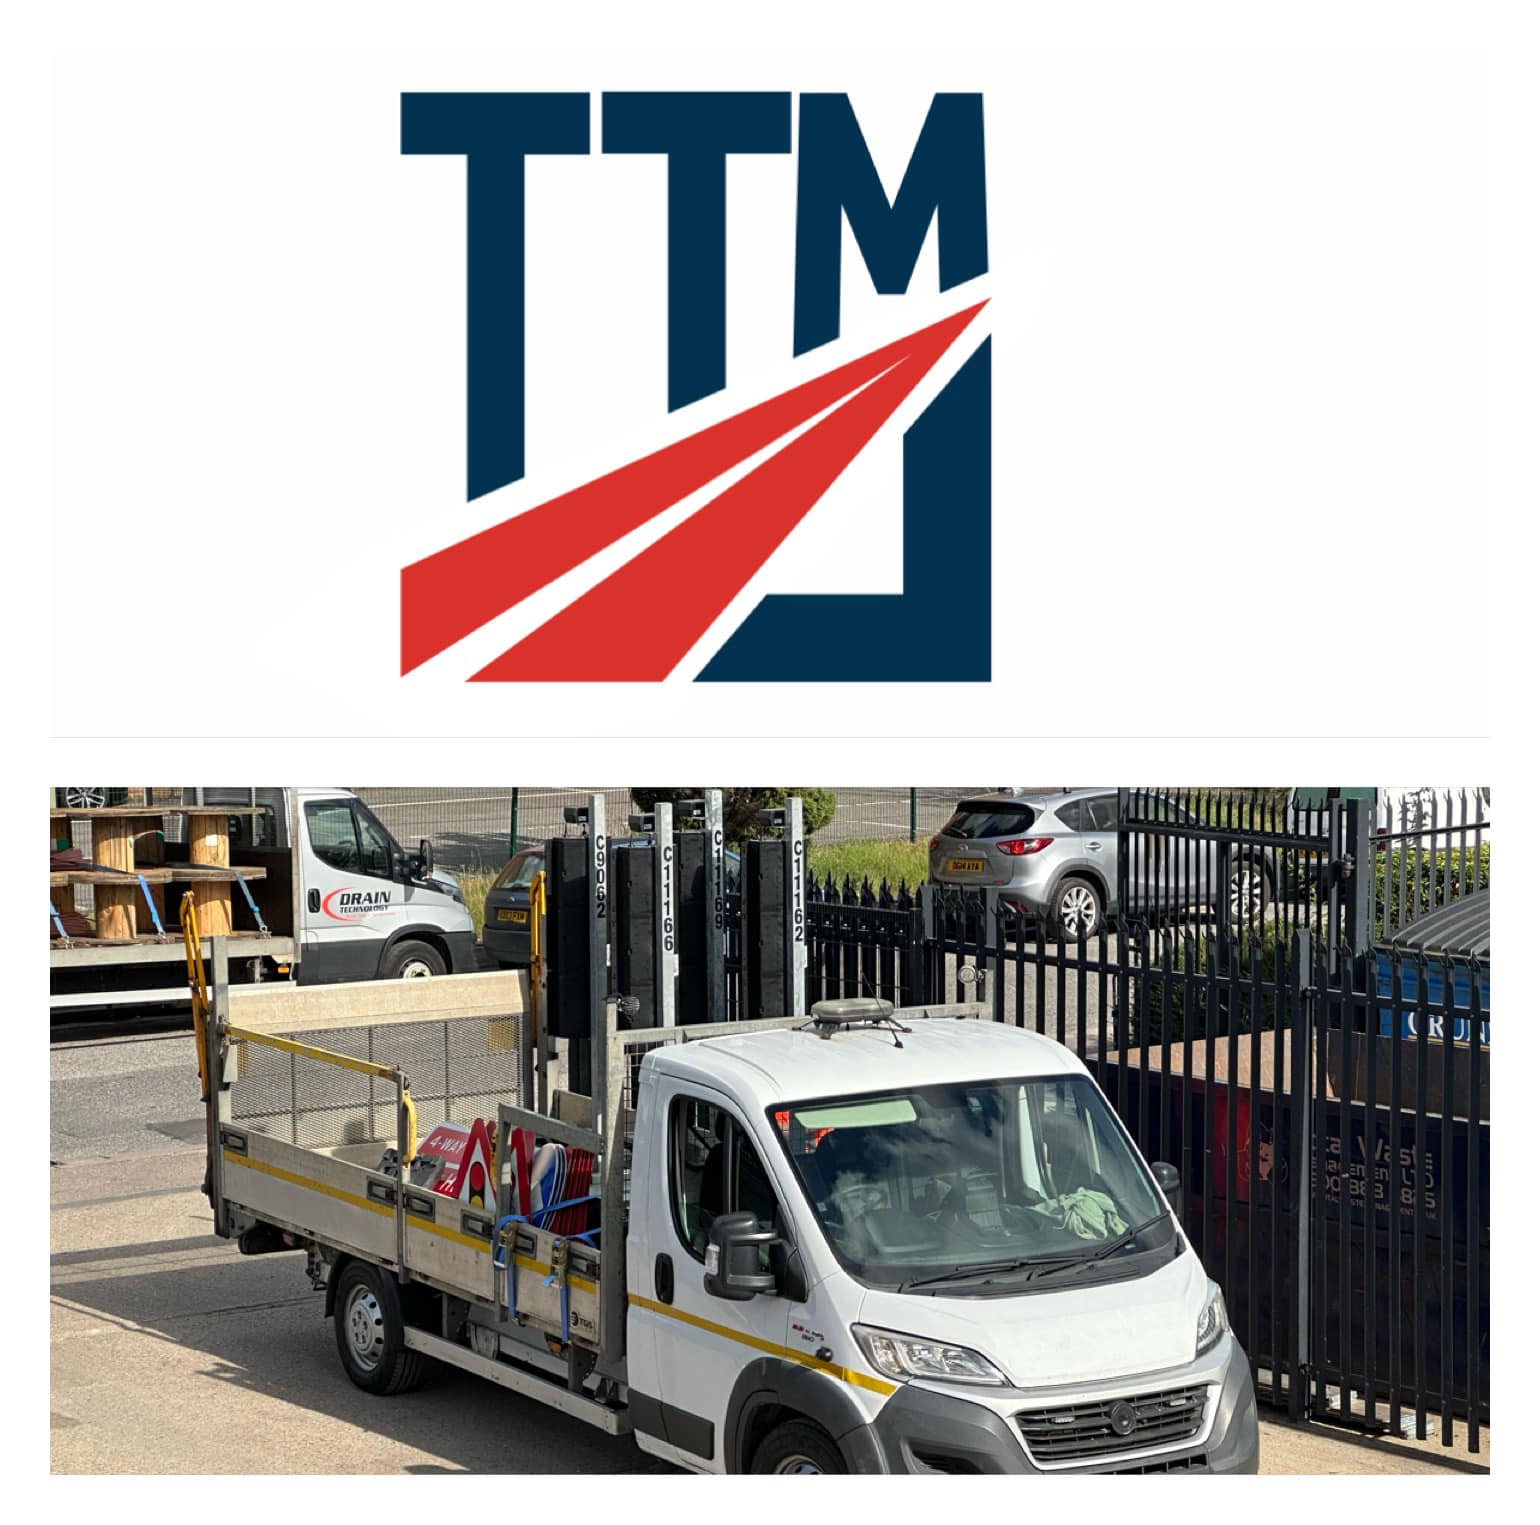 Image of traffic management truck with TTM logo above